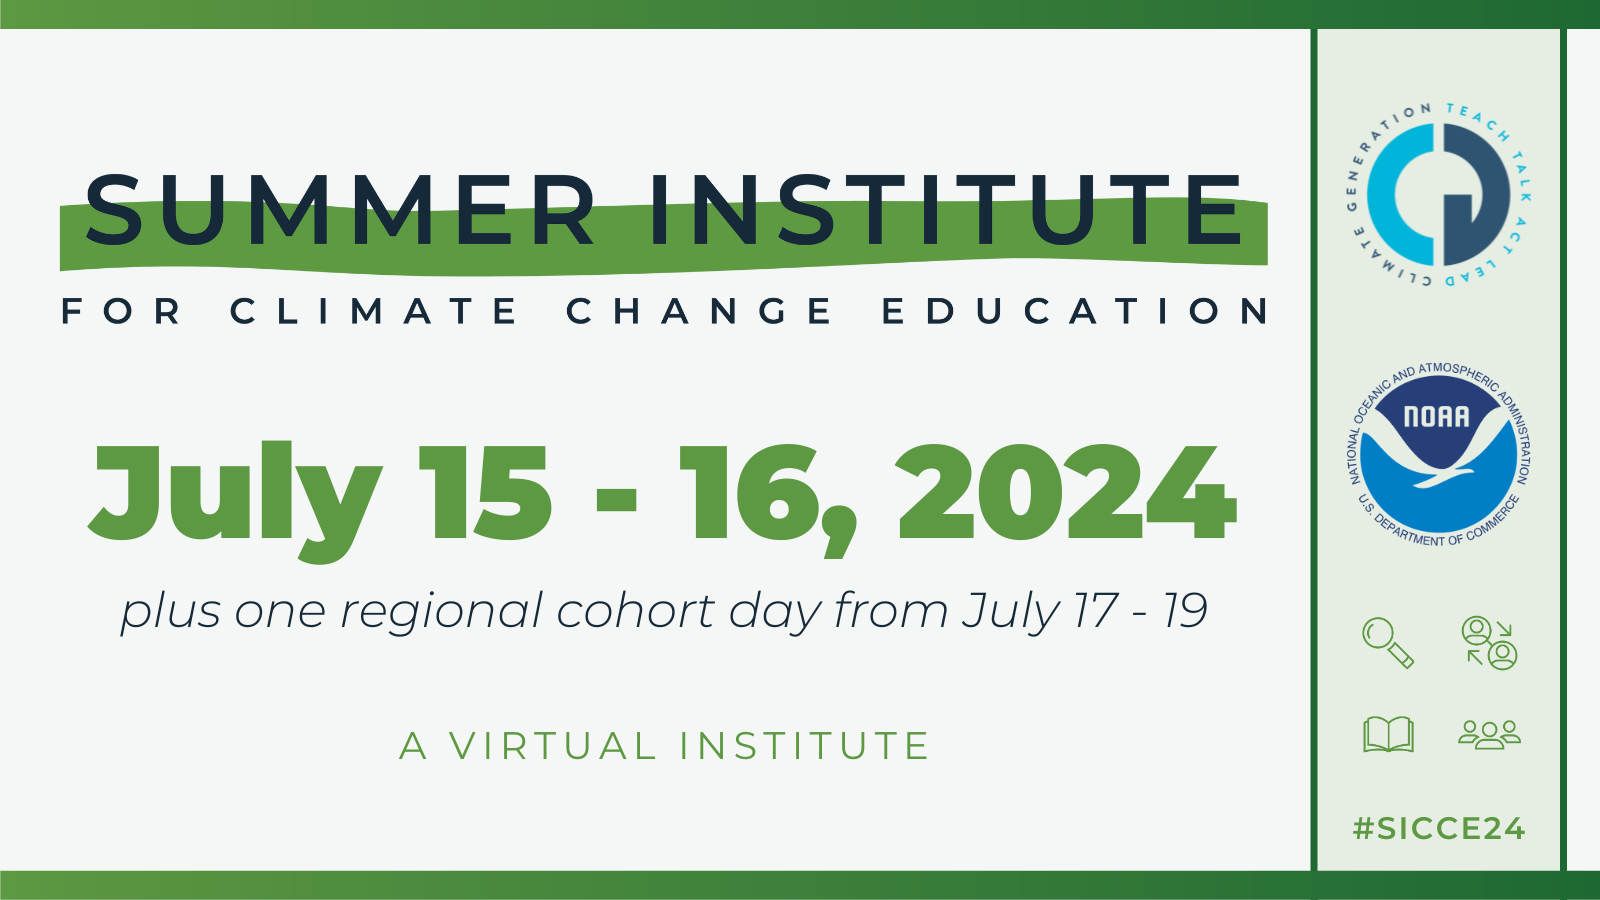 Summer Institute for Climate Change Education July 15- 16, 2024  plus one regional cohort day from July 17-19  A virtual Institute with logos from NOAAA and Climate Generation and other icons